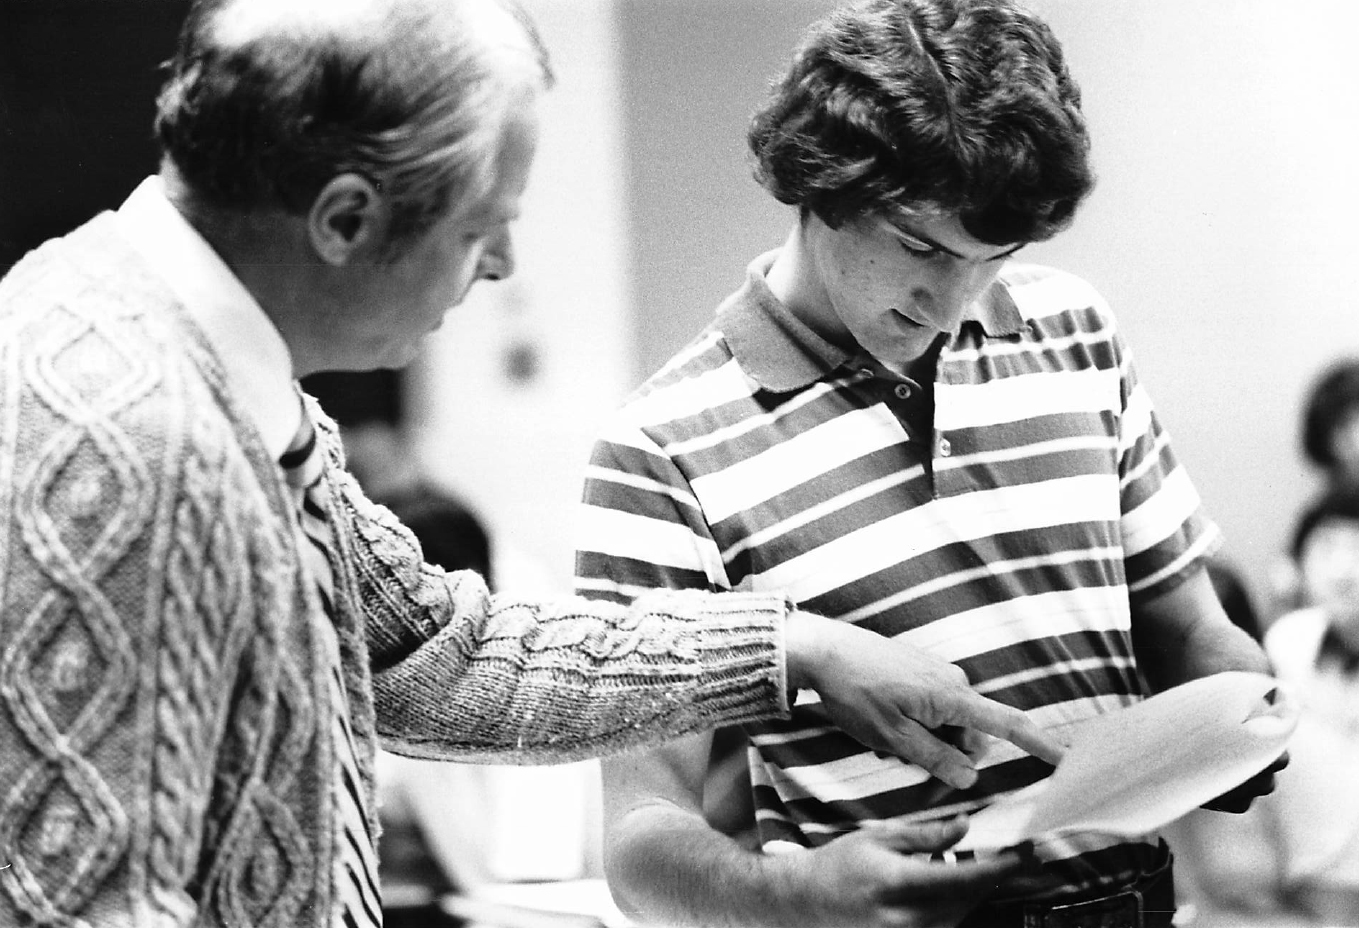 In a black and white candid photo, Professor John Ferling (left), remarks on a student's paper work (right) in class.